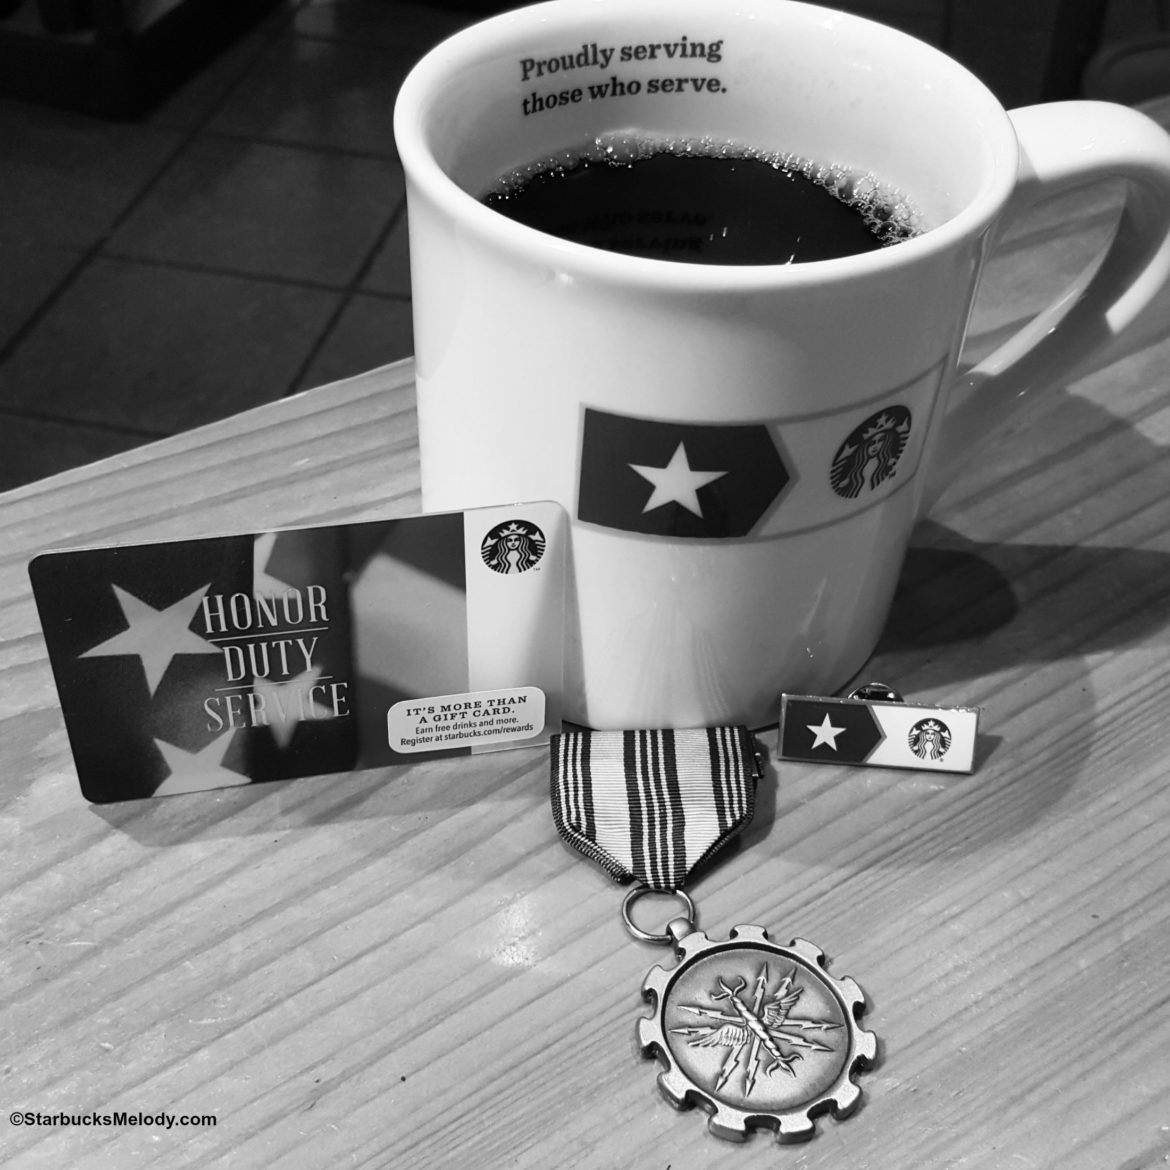 Veteran’s Day 2015: Free tall coffee for veterans (and military spouses) at Starbucks